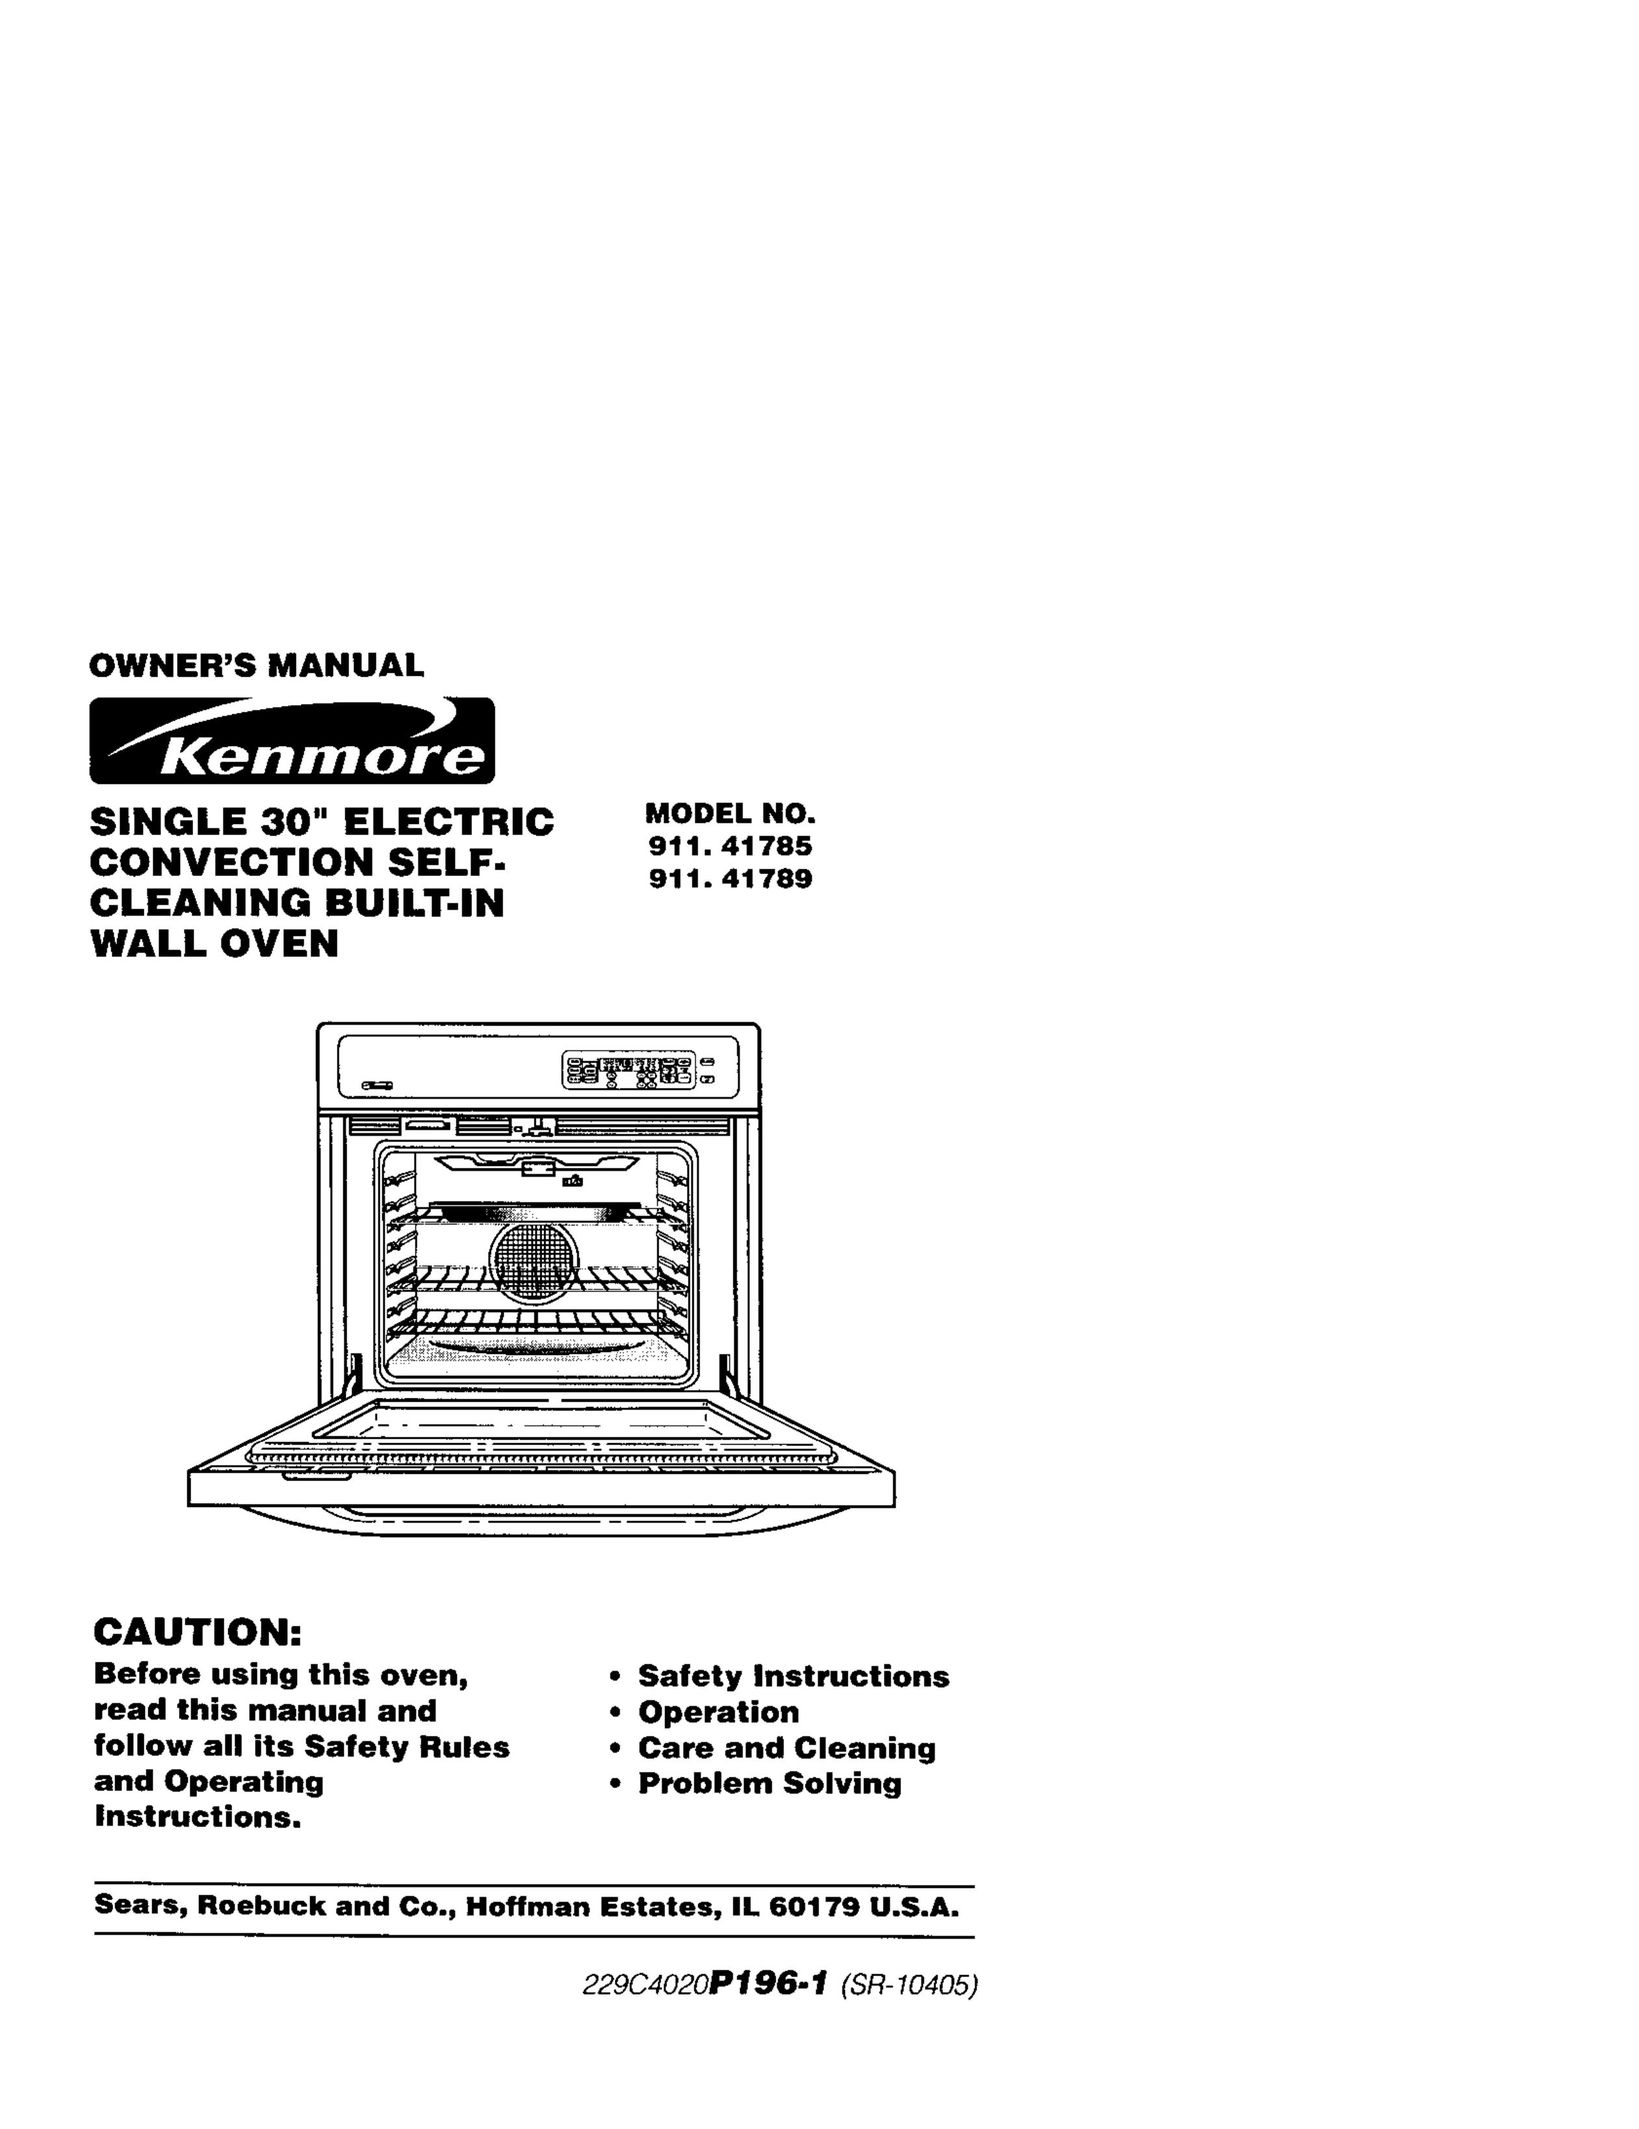 Kenmore 911.41789 Convection Oven User Manual